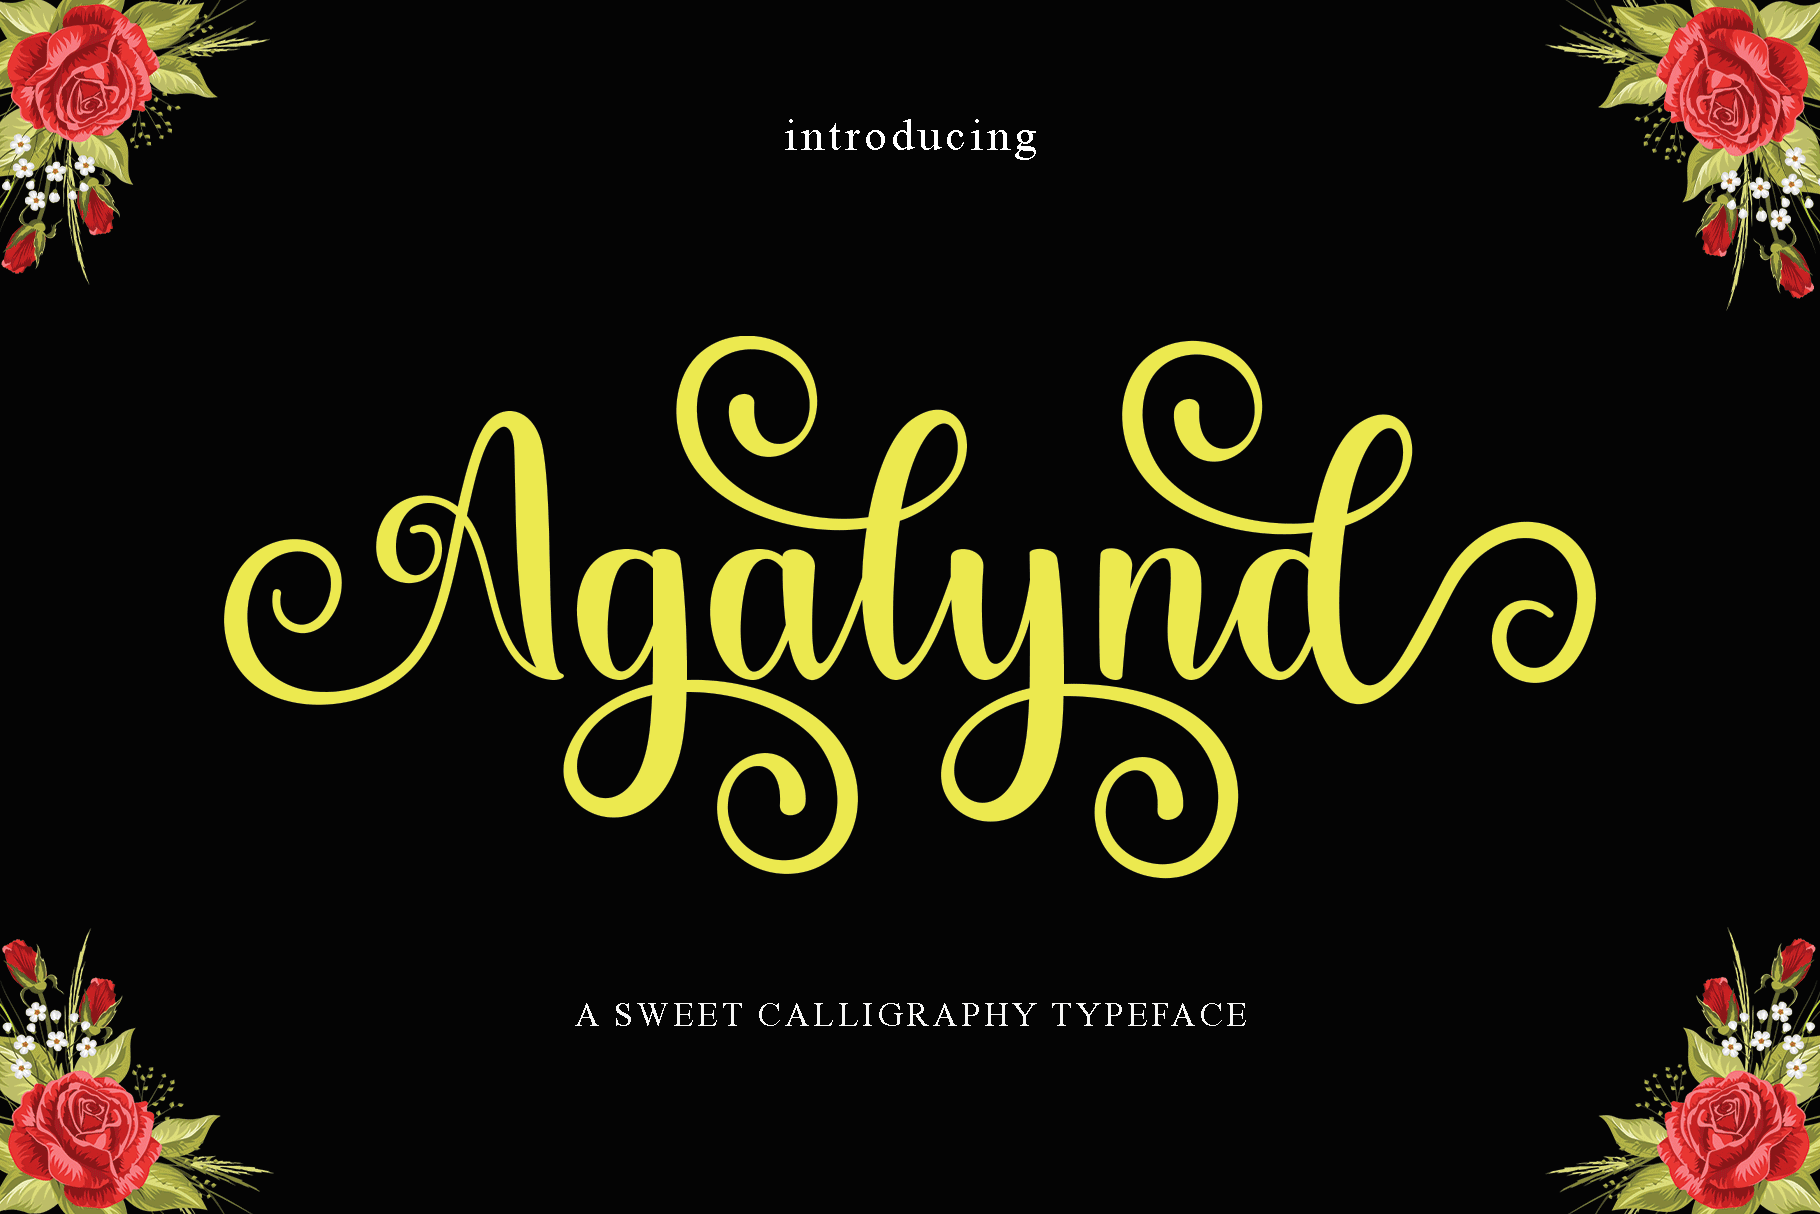 Agalynd Modern Calligraphy cover image.